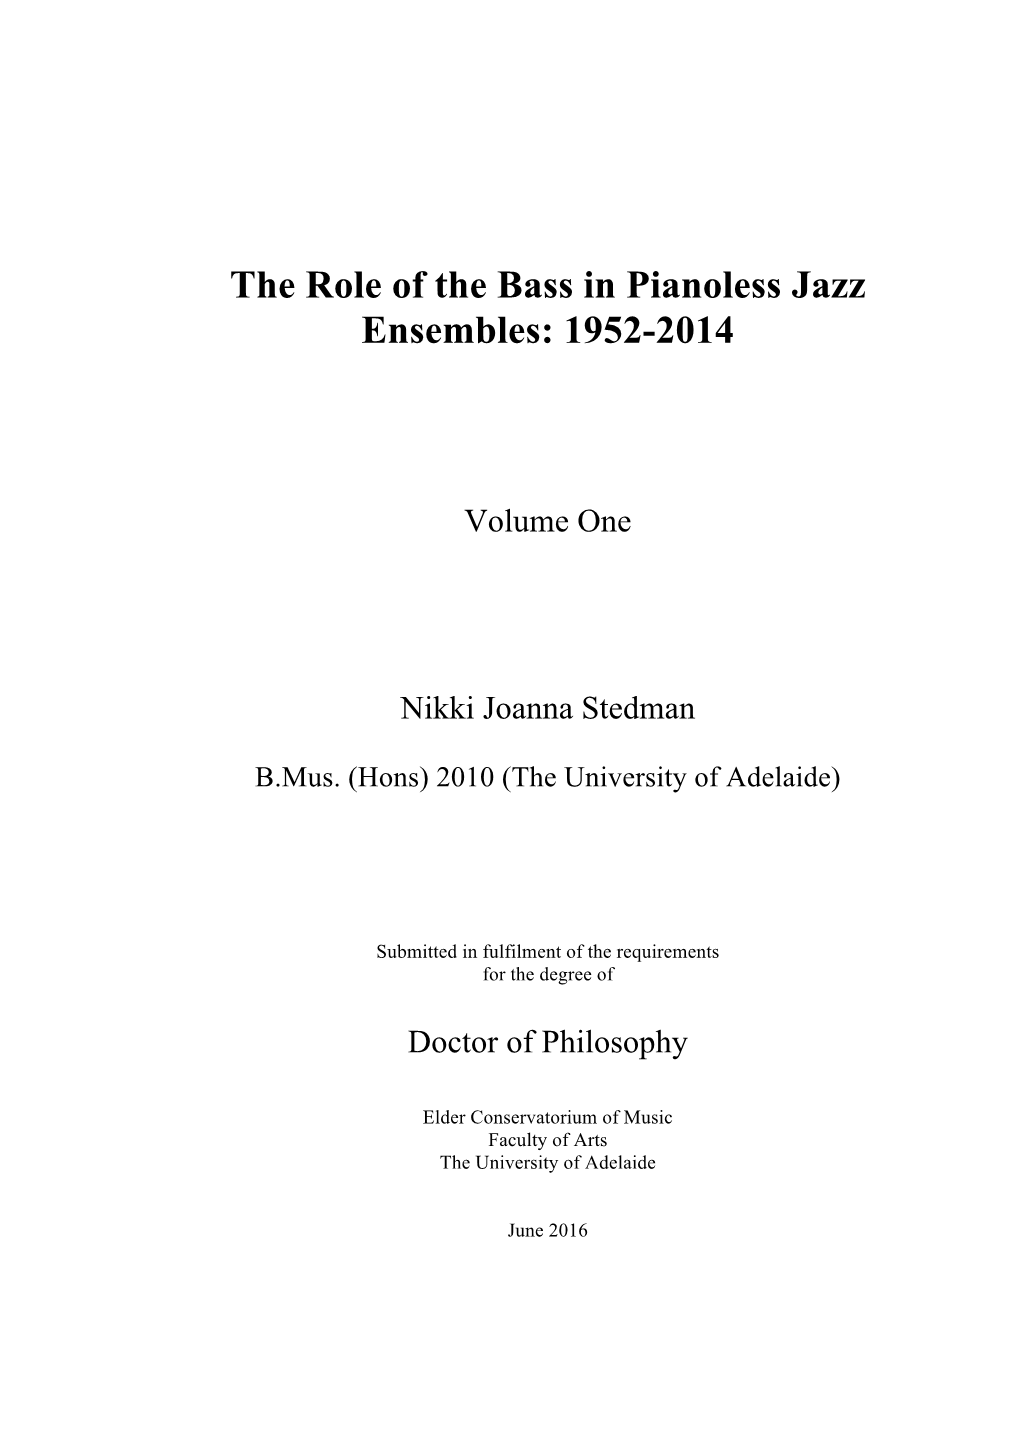 The Role of the Bass in Pianoless Jazz Ensembles: 1952-2014